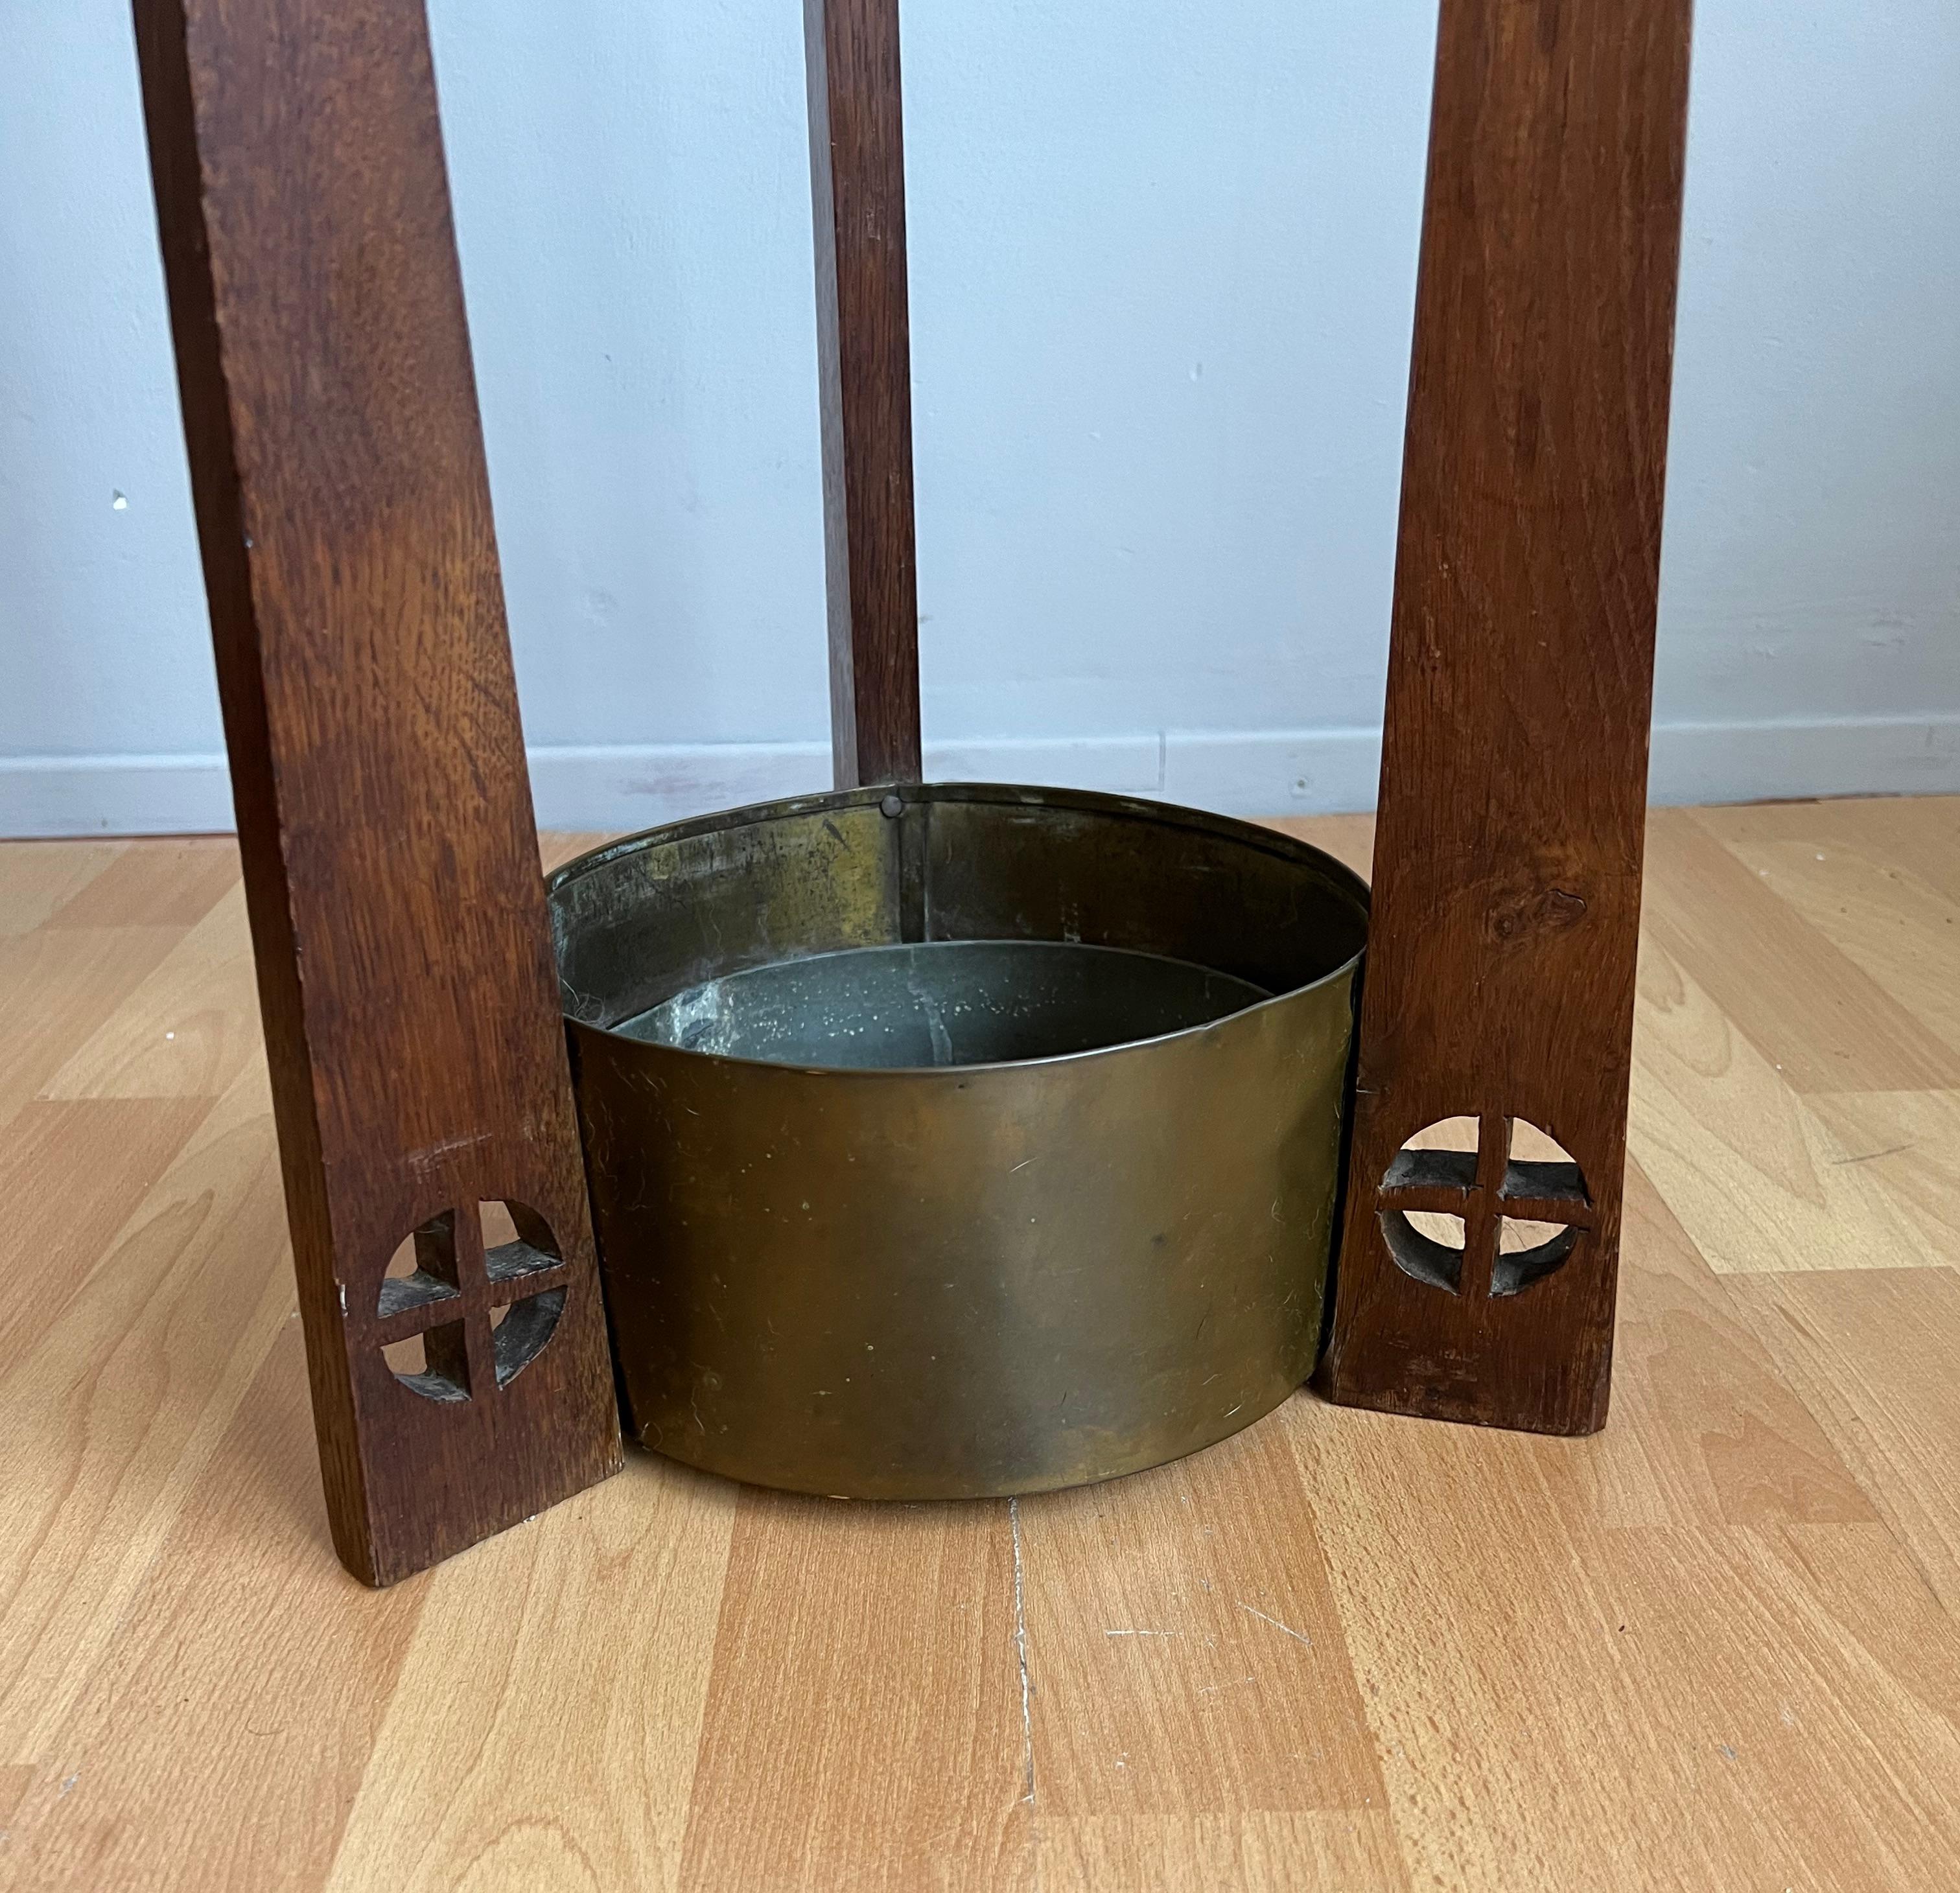 Gustave Serrurier-Bovy Brass and Oak Cane & Umbrella Stand with Zinc Liner For Sale 3